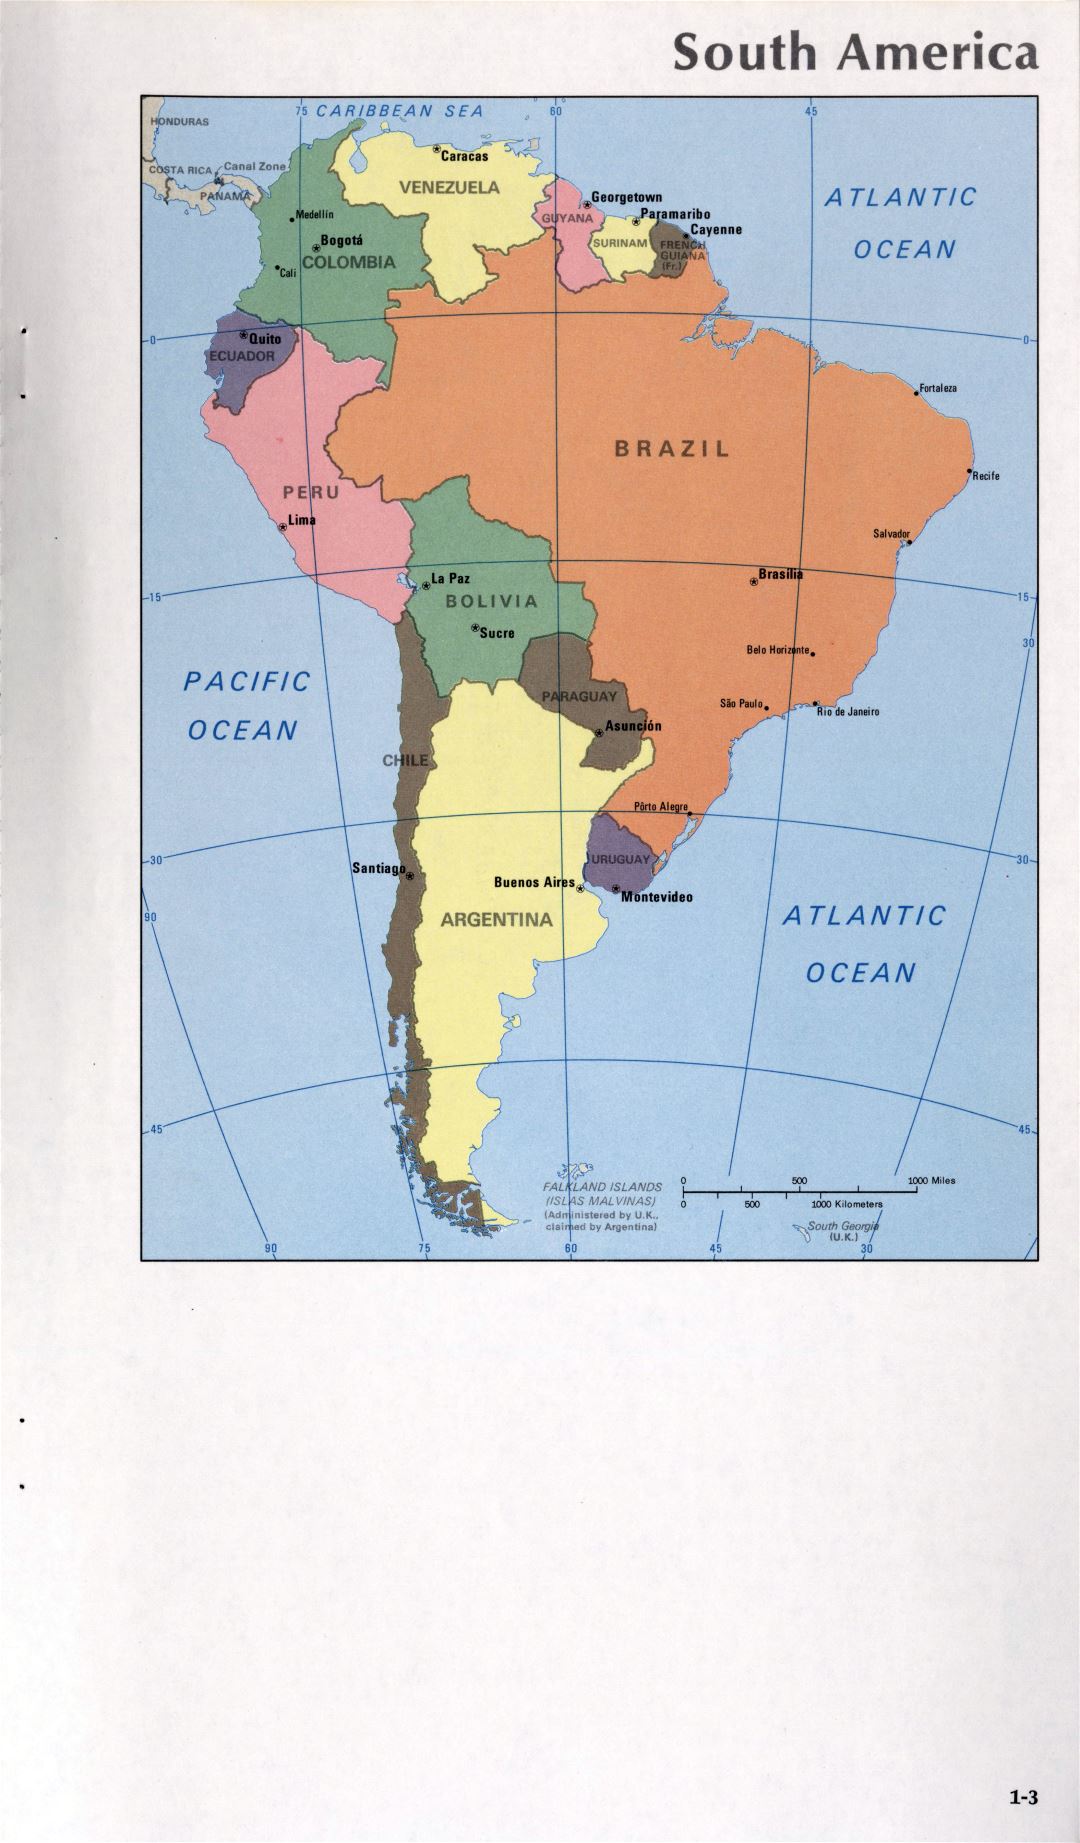 Map of South America (1-3)